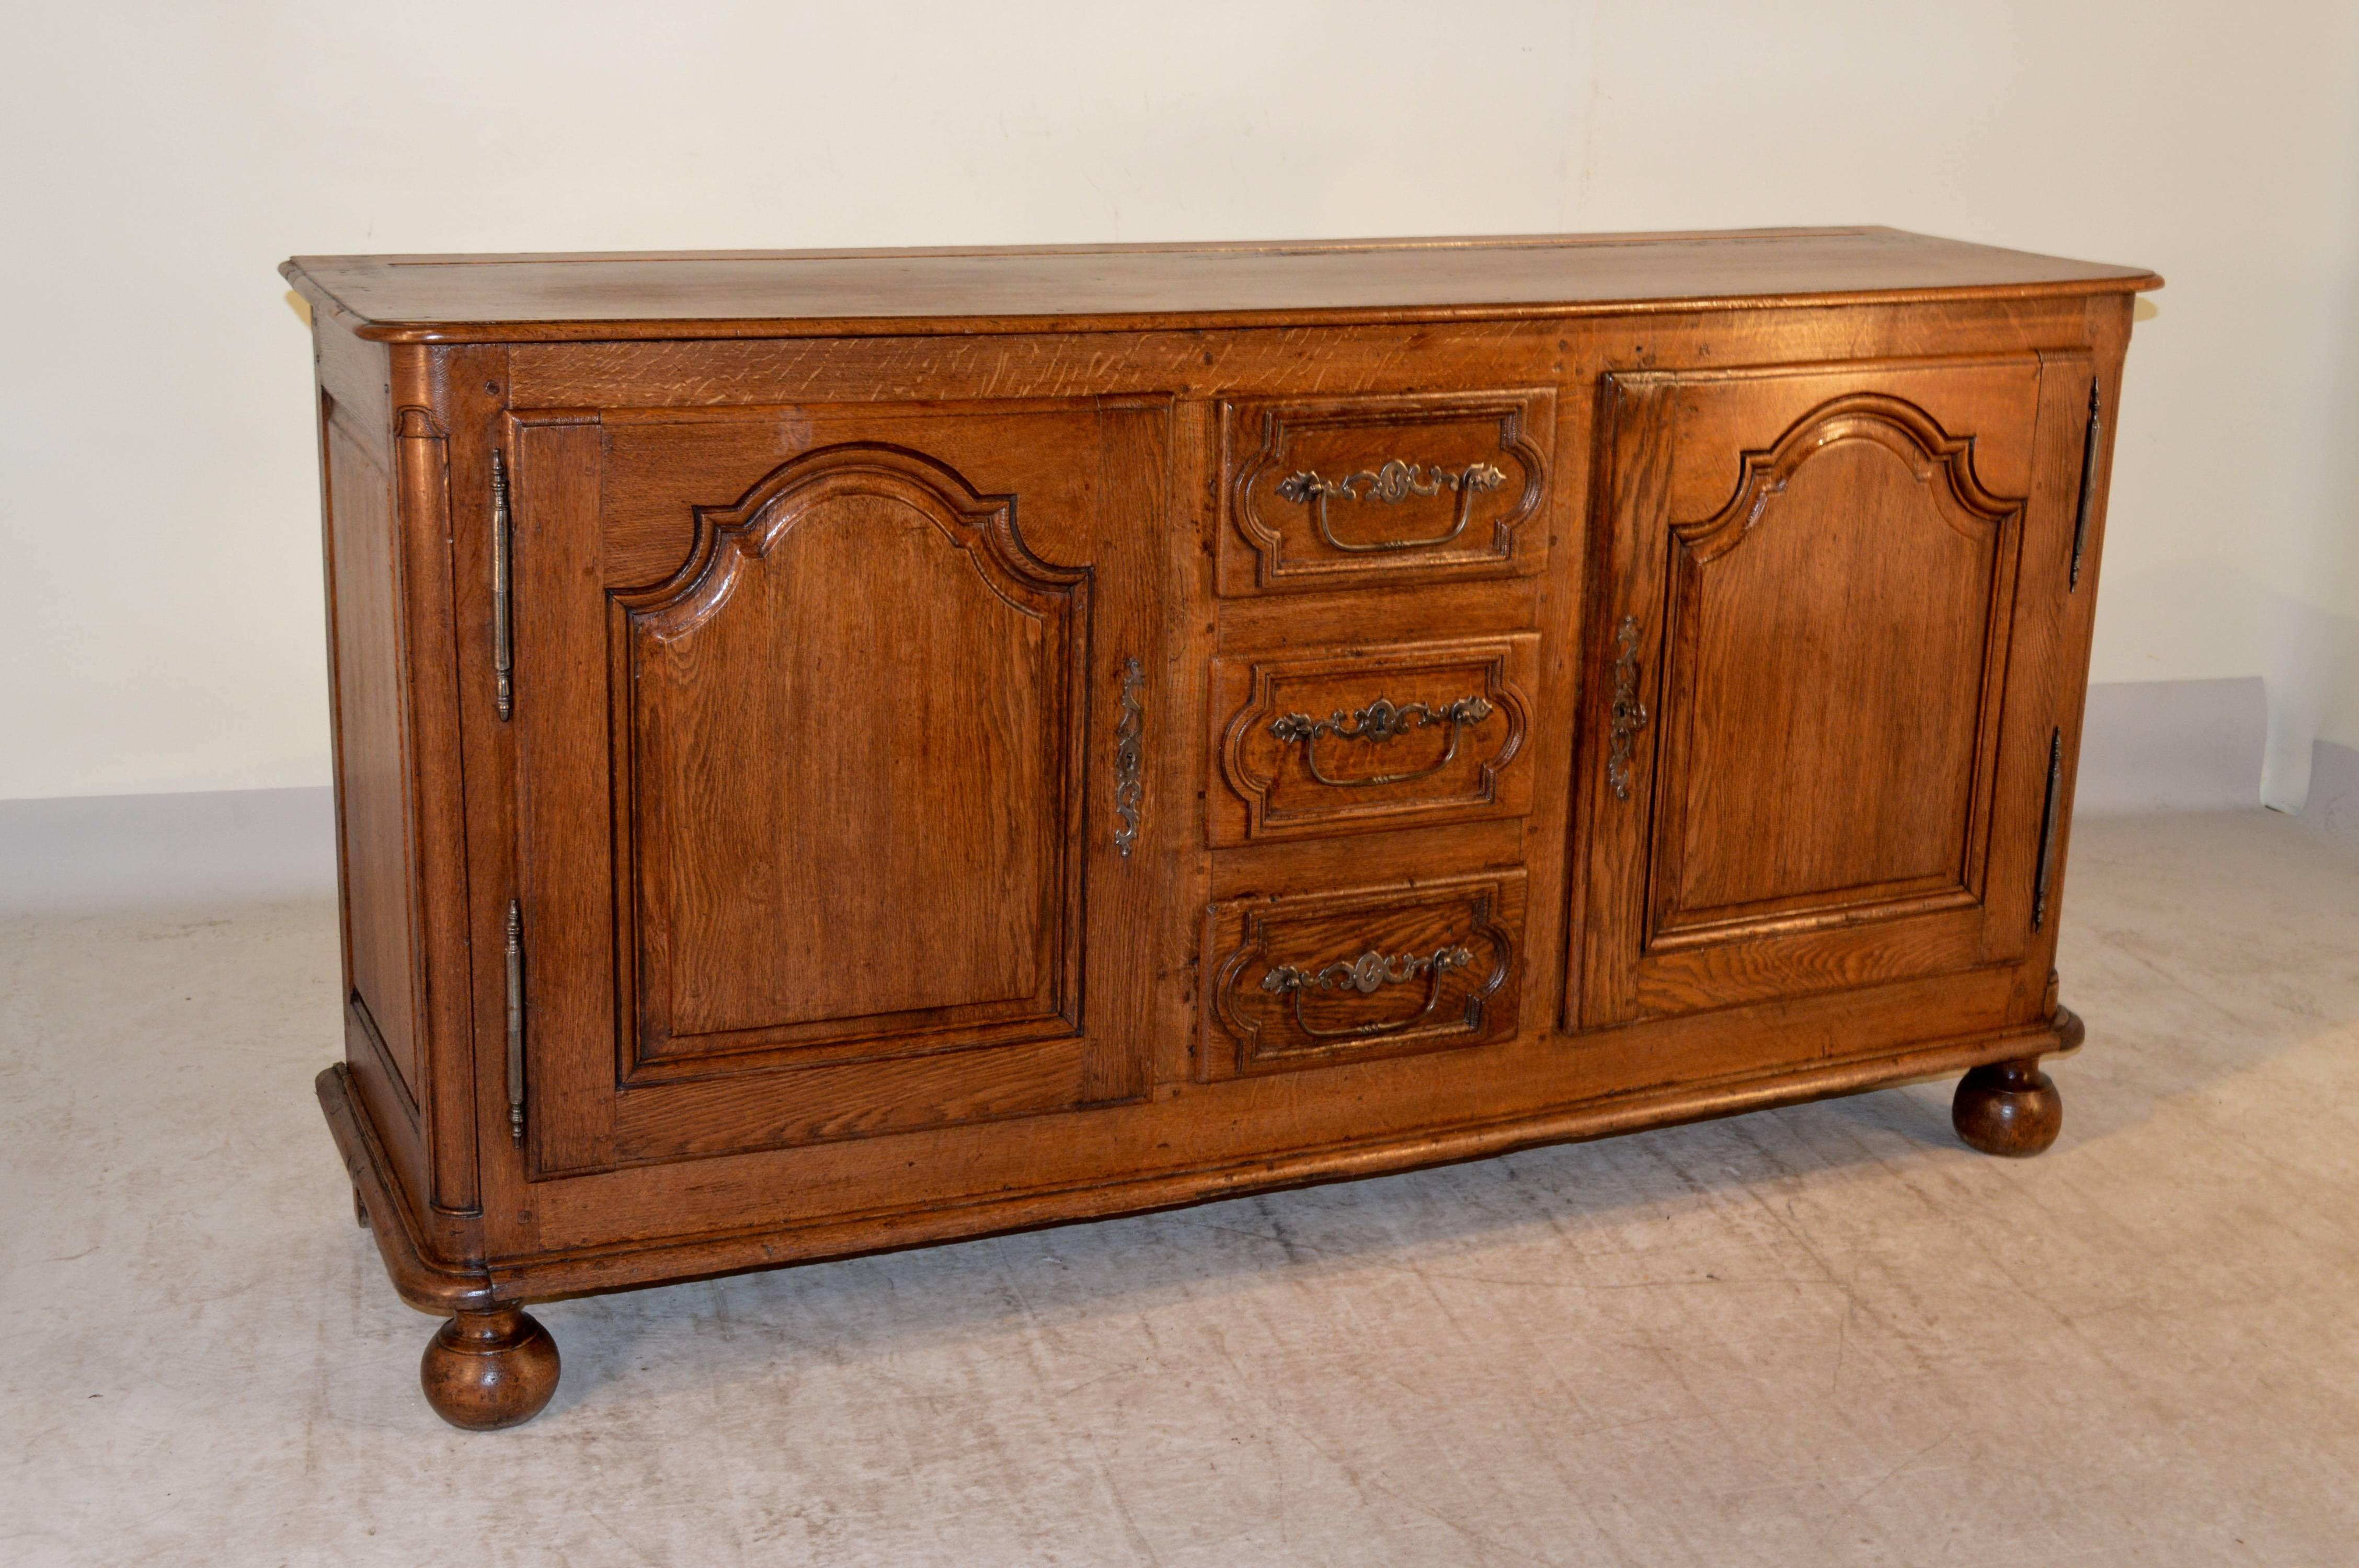 18th century French enfilade made from oak with a beveled edge around the top, which also has a plate rail. The case has paneled sides and two doors with raised panels flanking three central drawers, which have raised paneled drawer fronts and